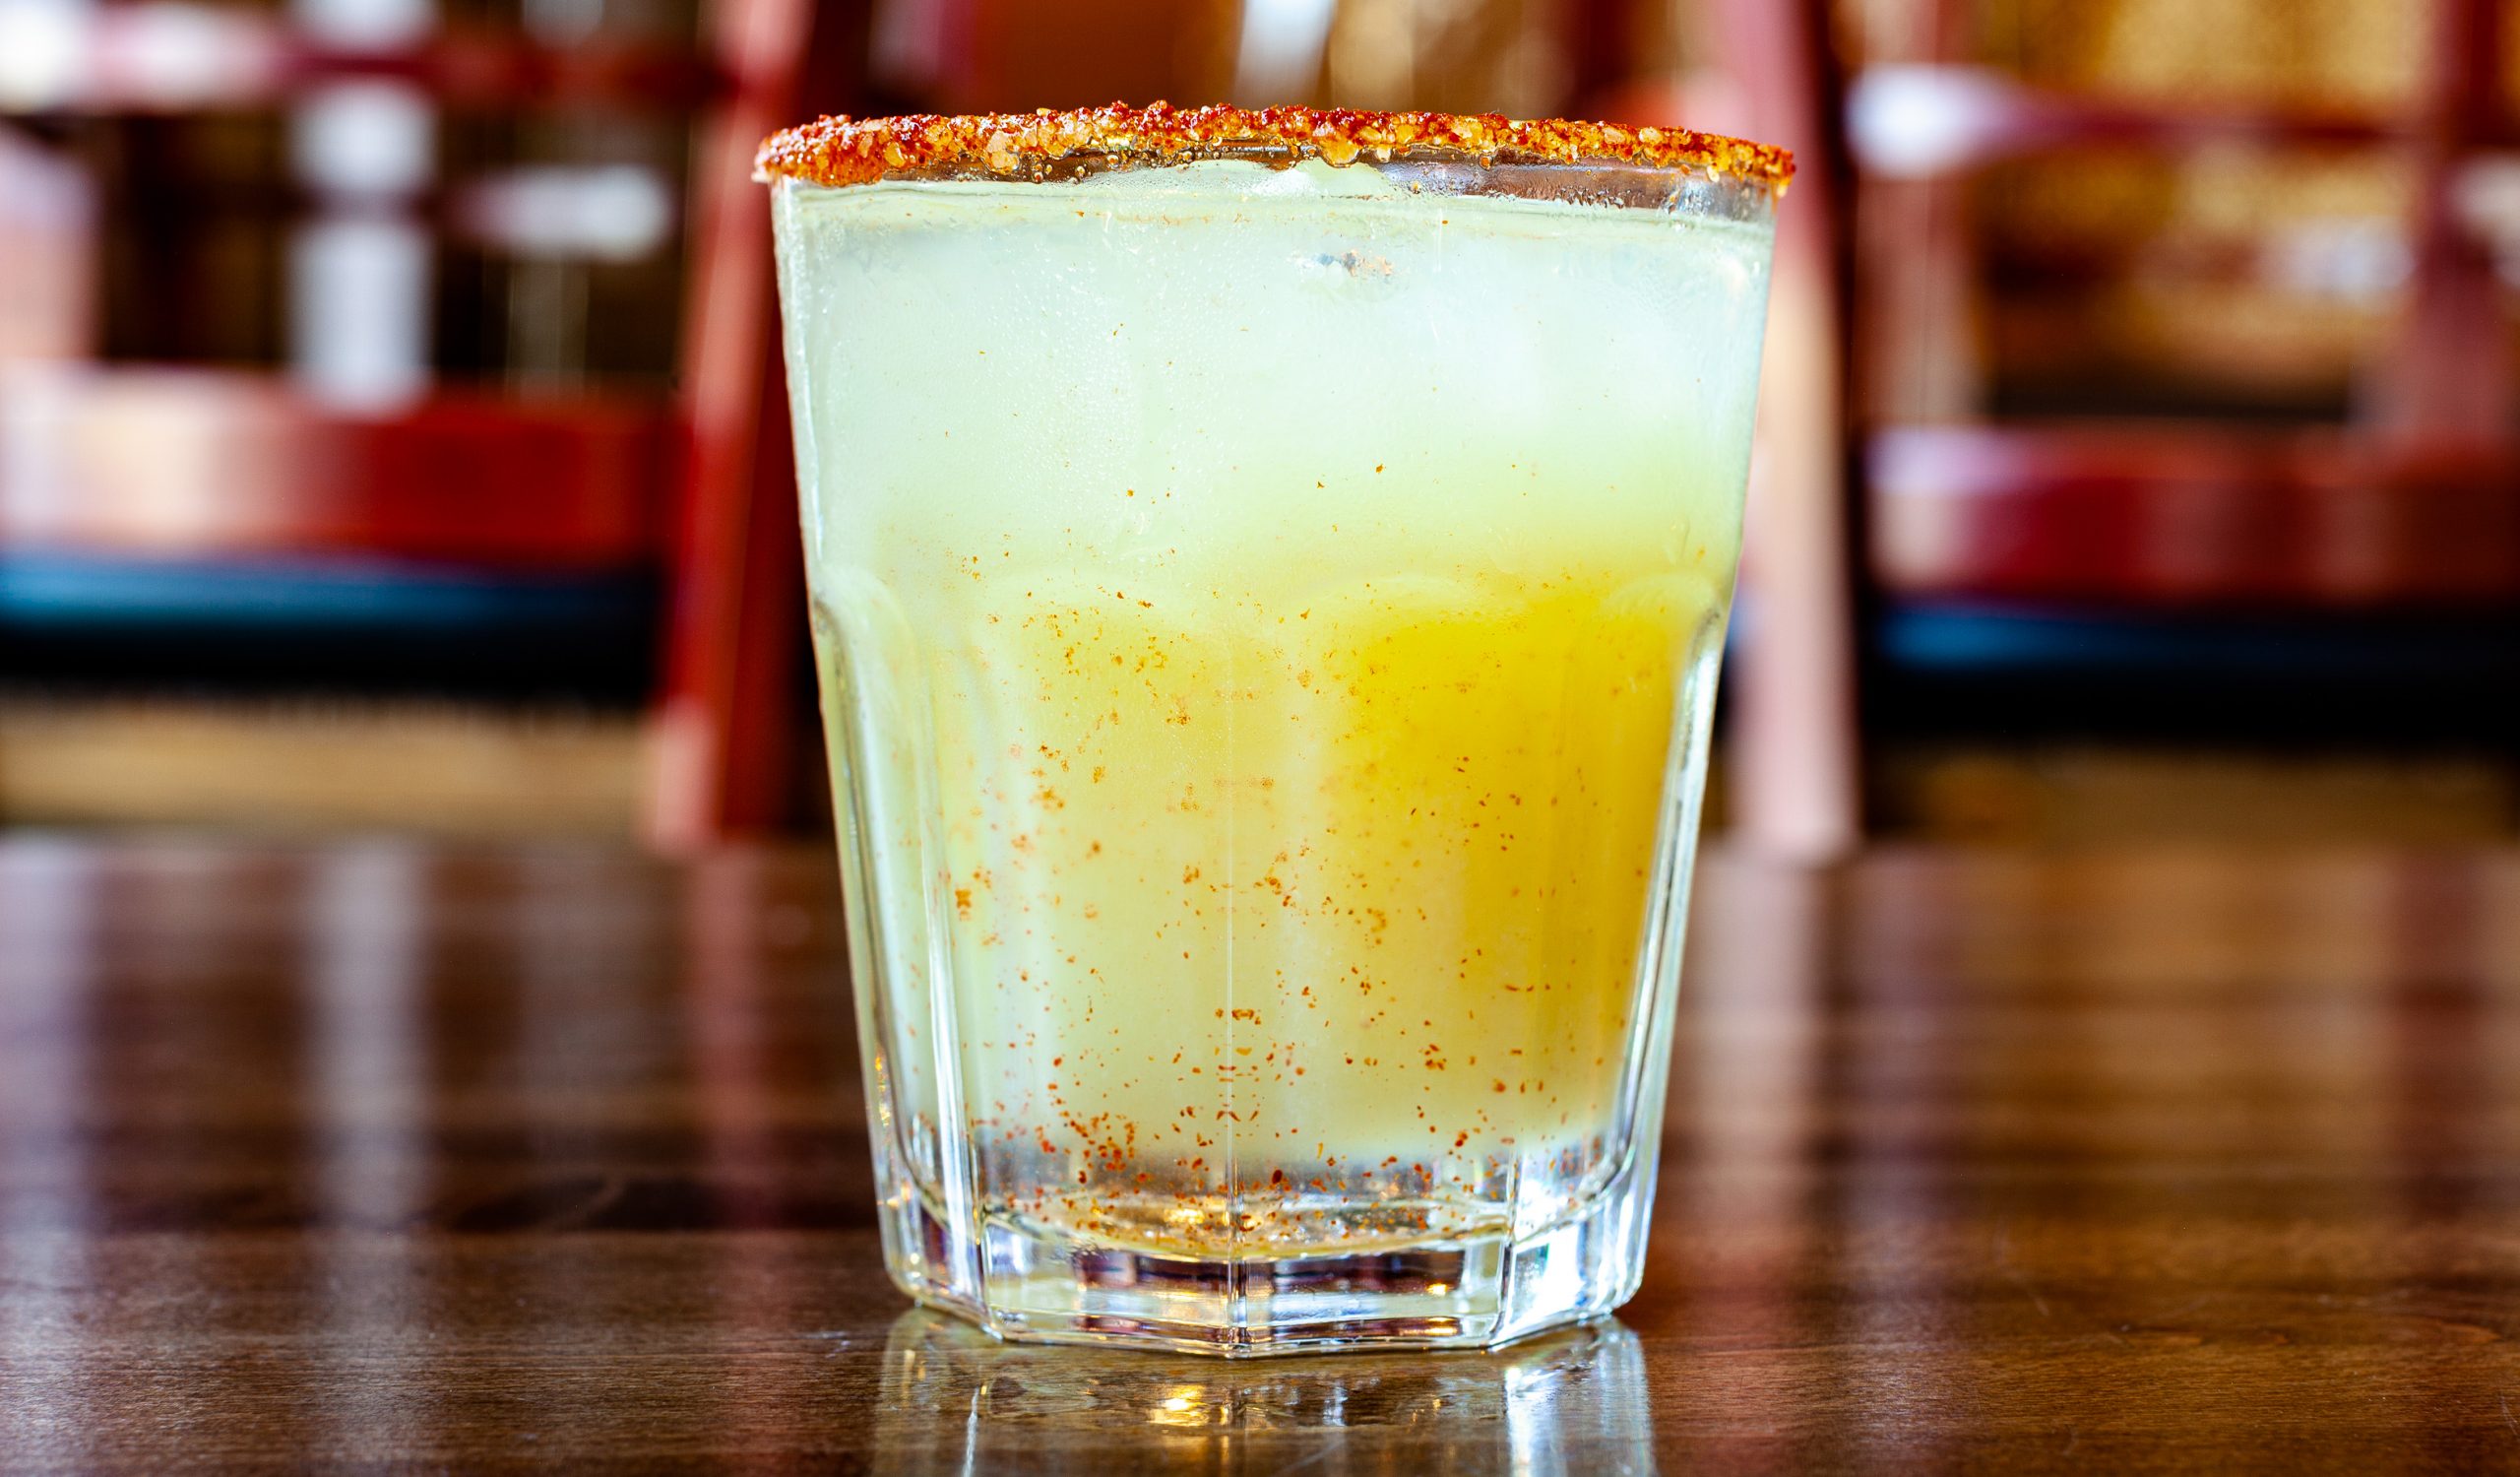 Chili Margarita coktail with 1oz Milagro tequila, lime, chili pepper syrup and a spicy house-made salt rim